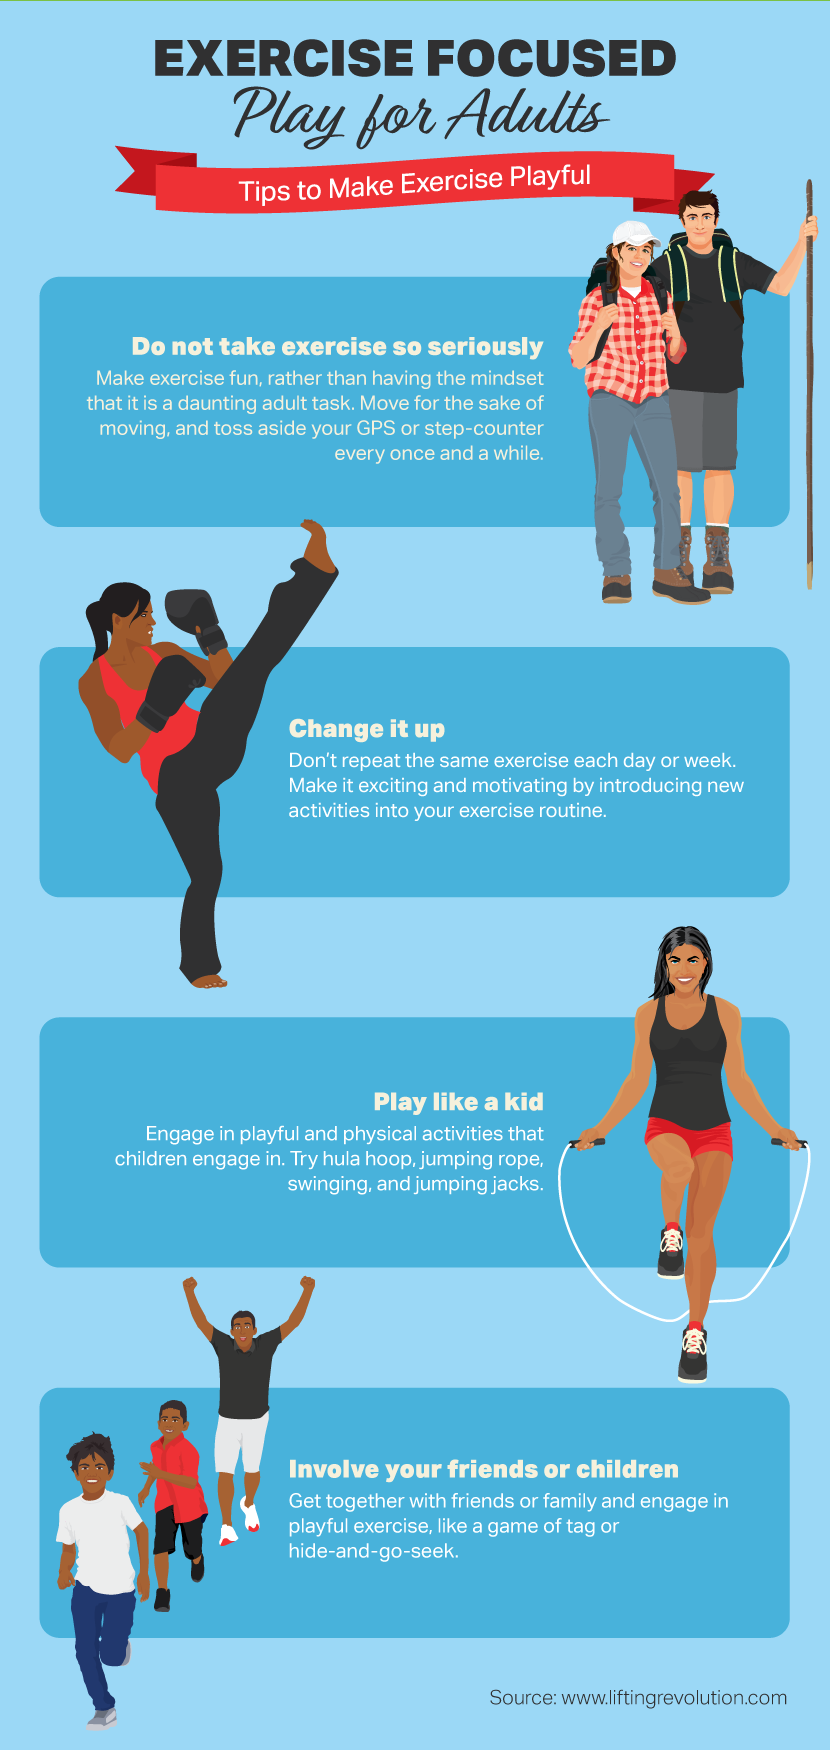 Exercise Focused Play For Adults - Why Adults Should be Playing More